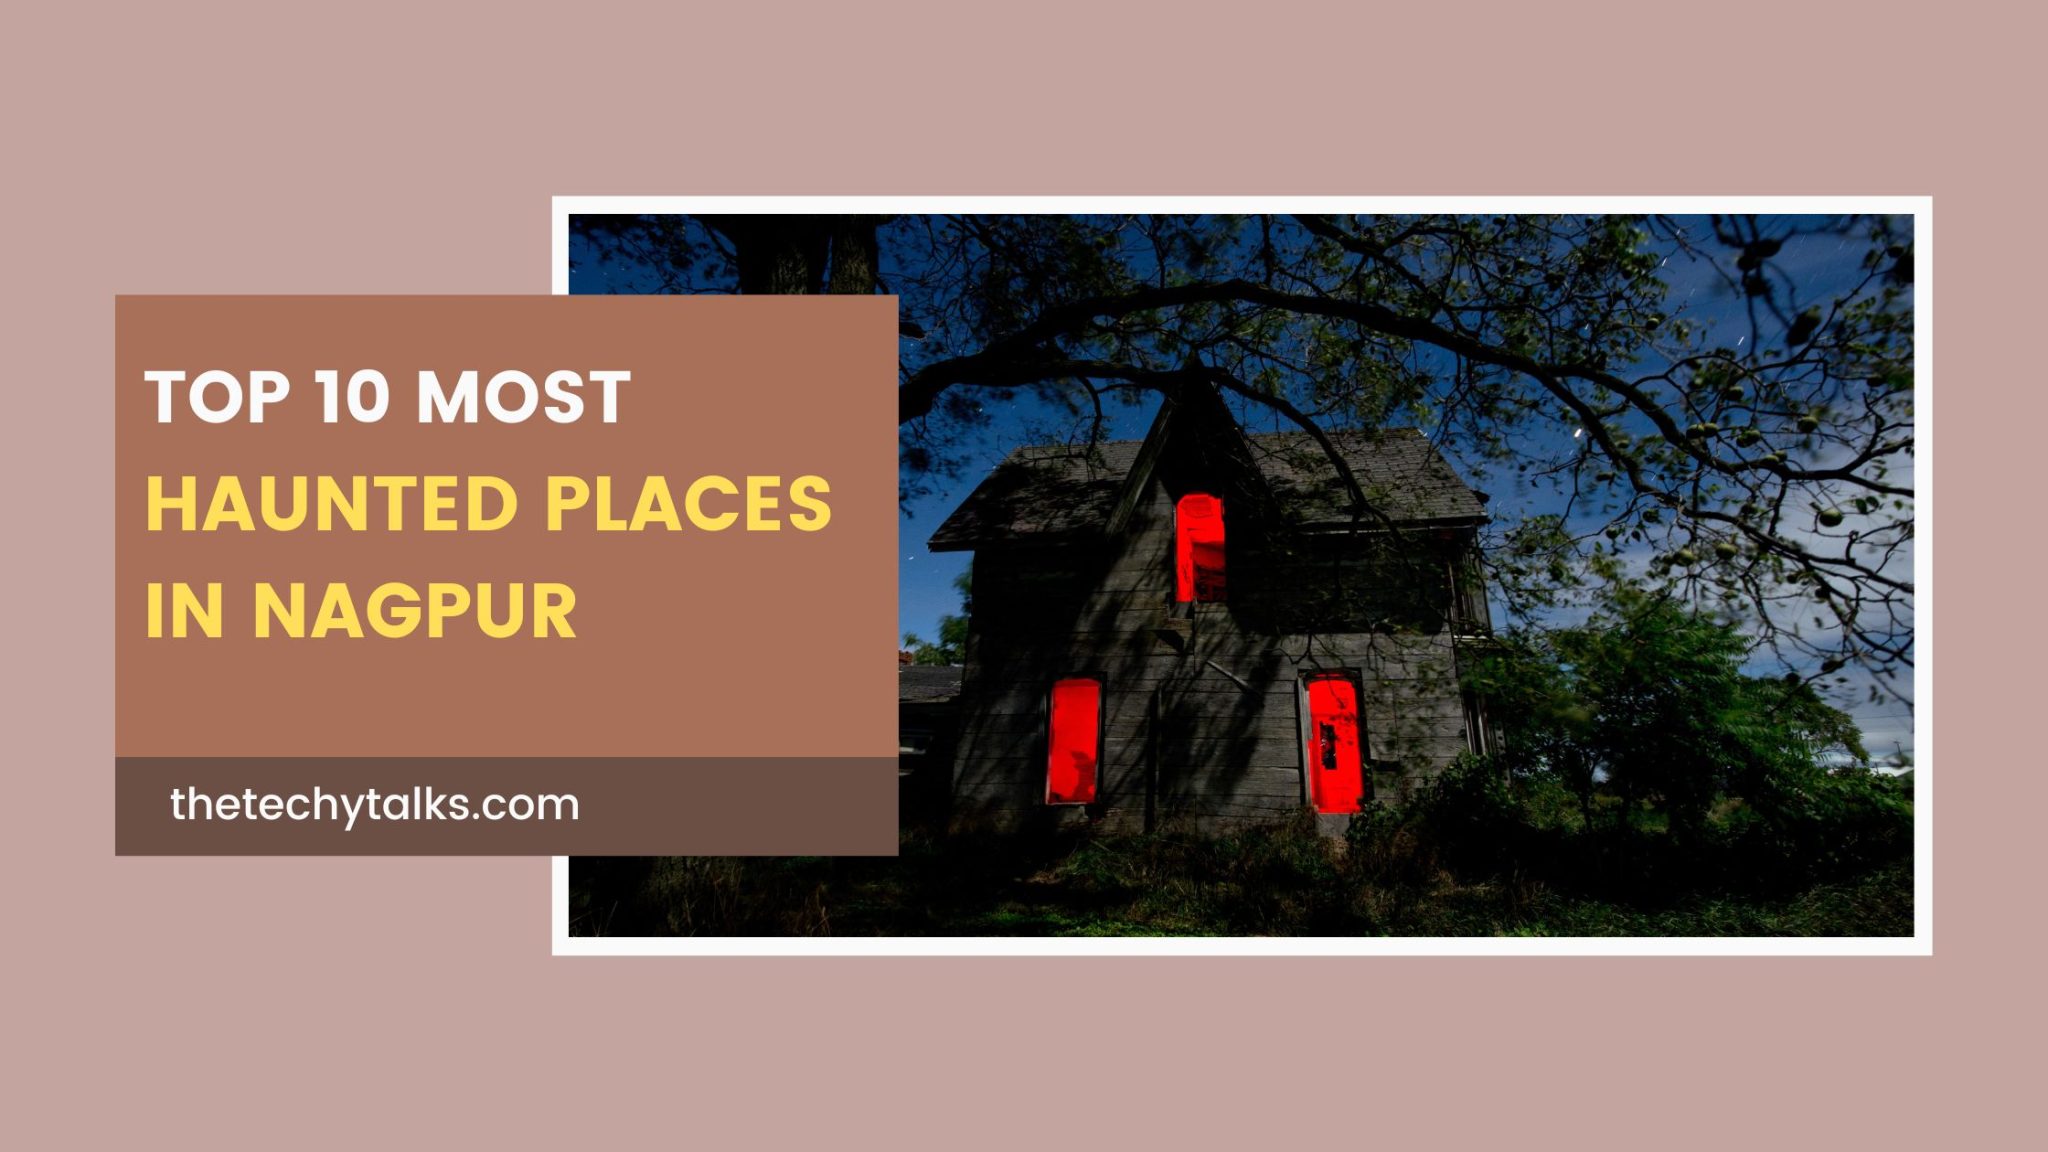 Top 10 Most Haunted Places in Nagpur